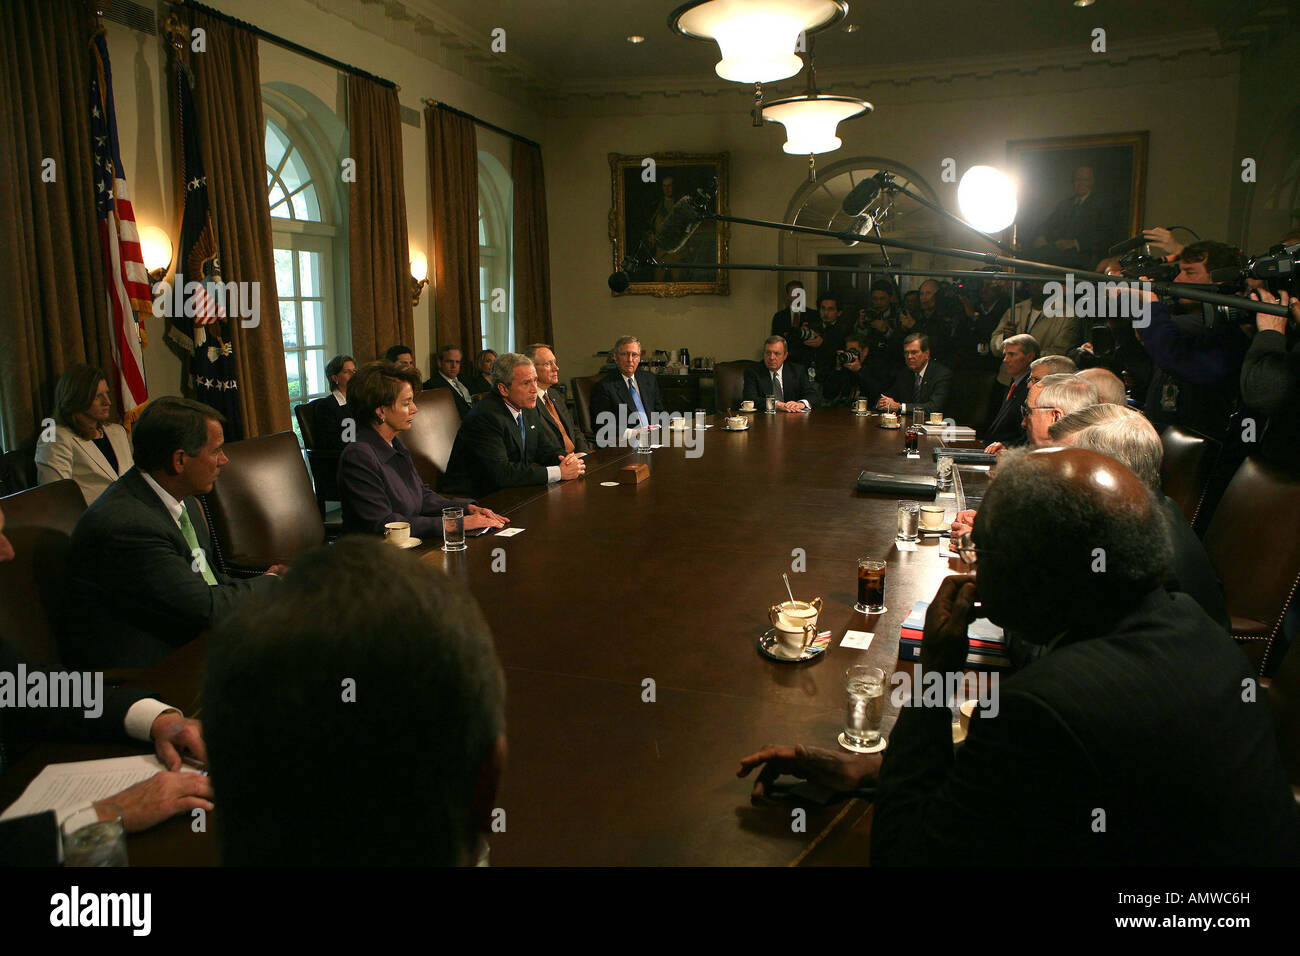 George W Bush meets with the bipartisan and bicameral leadership in the Cabinet Room of the White House on April 18,2007. Stock Photo